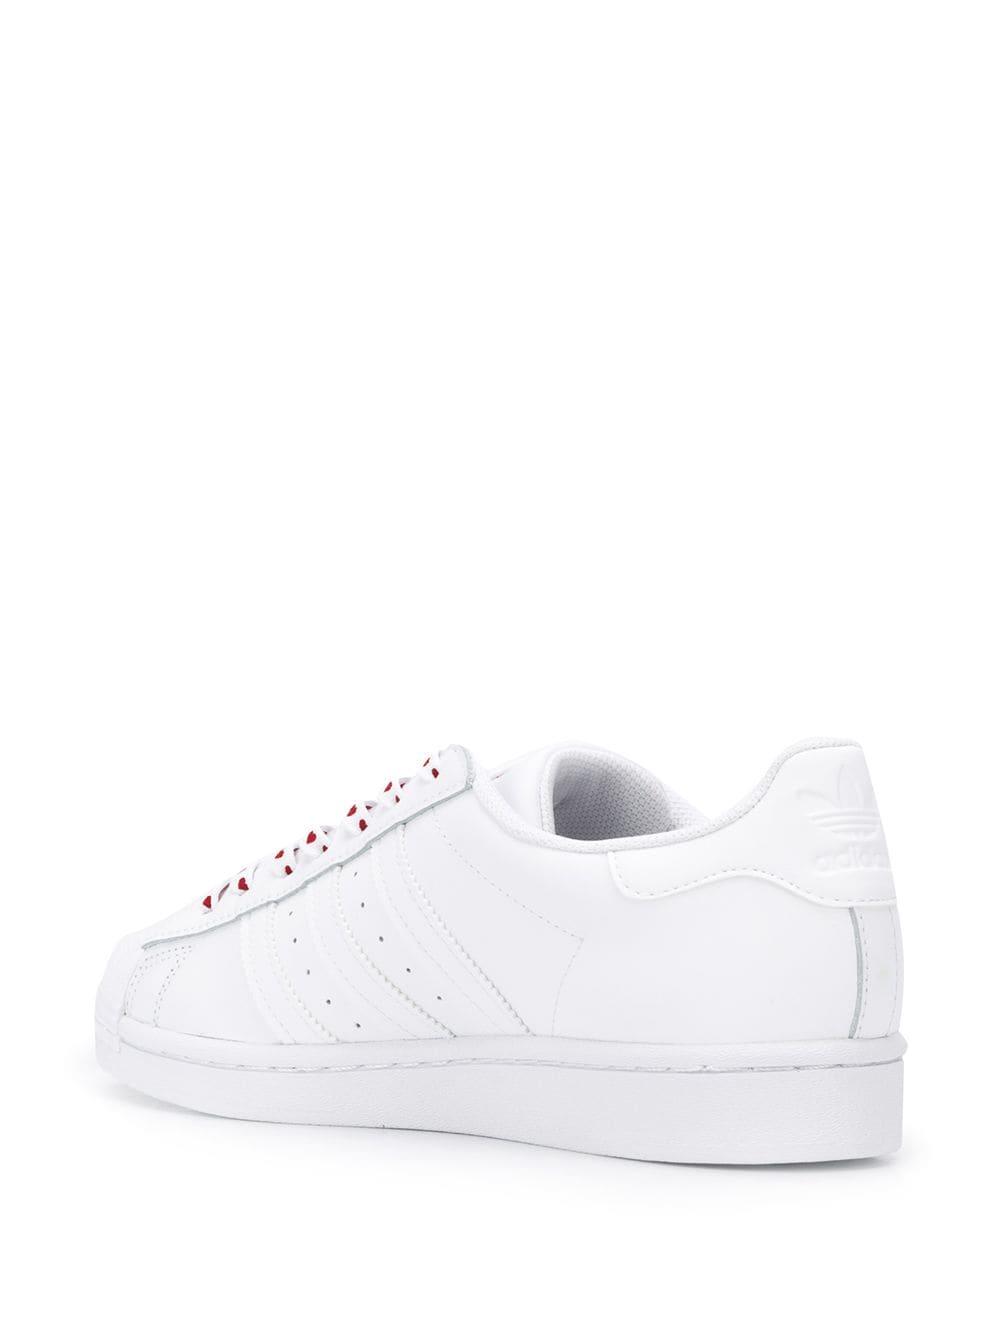 adidas Superstar Heart-print Sneakers in White | Lyst